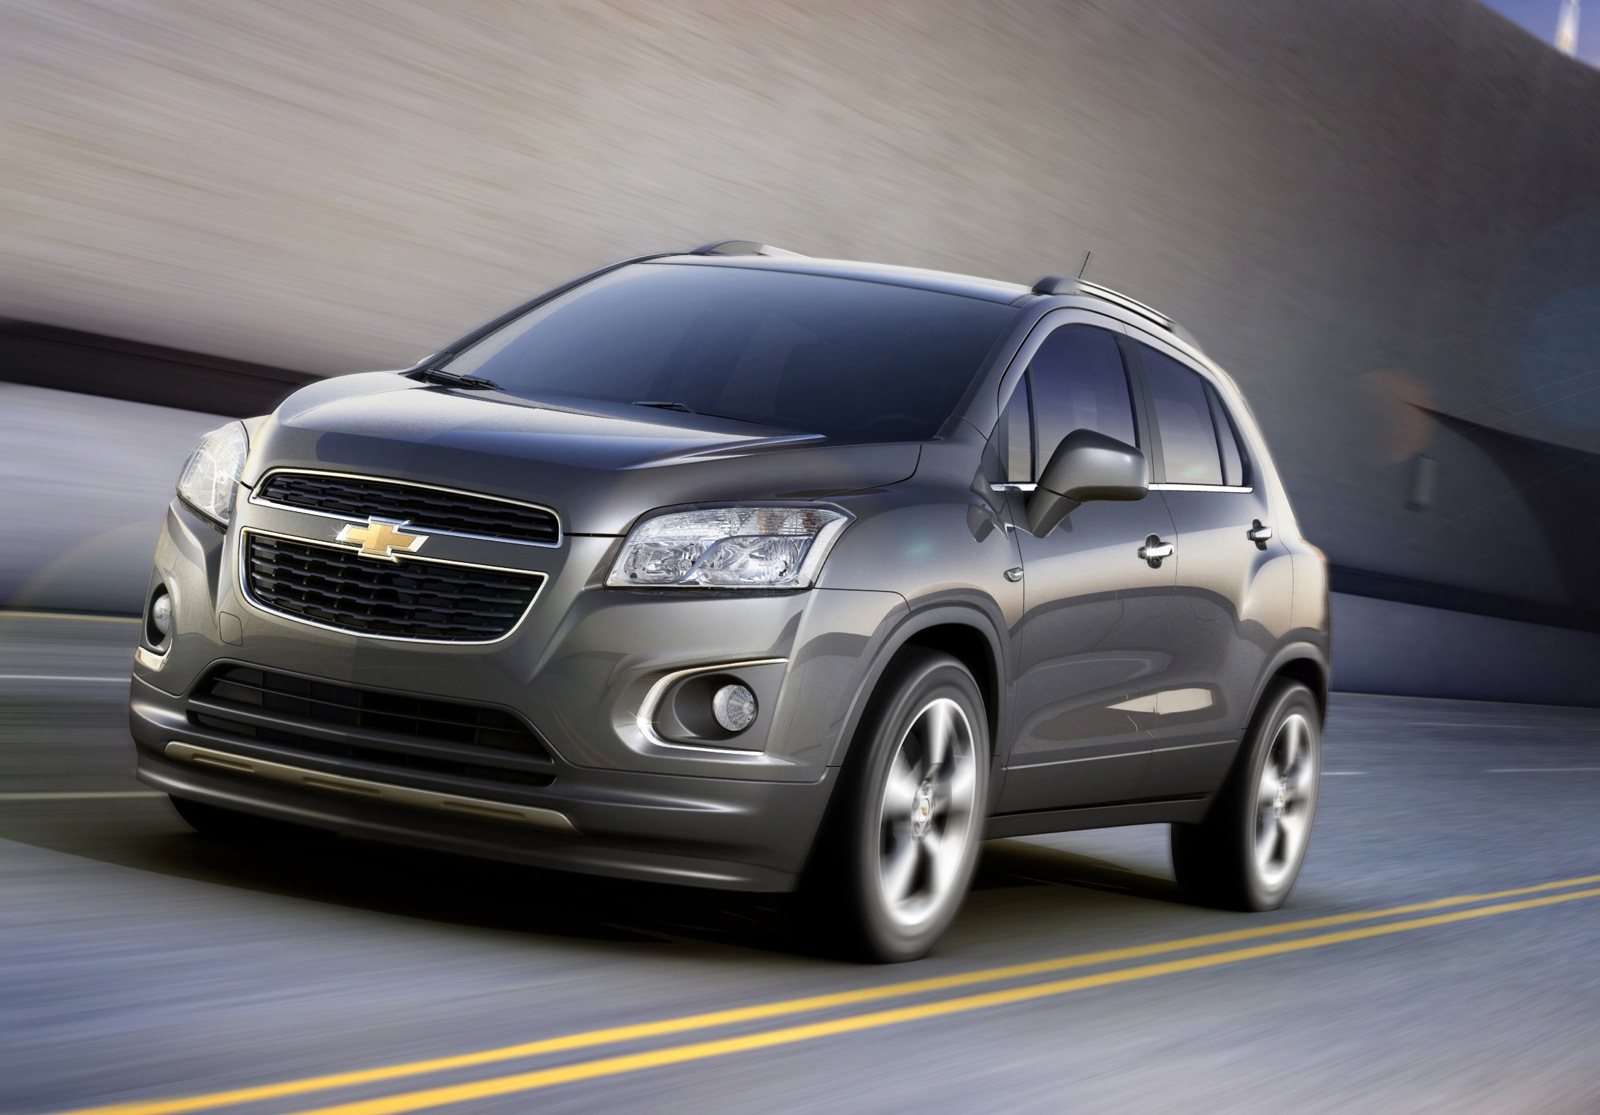 2013 Chevrolet Trax Crossover Is Forbidden Fruit For U.S. Customers